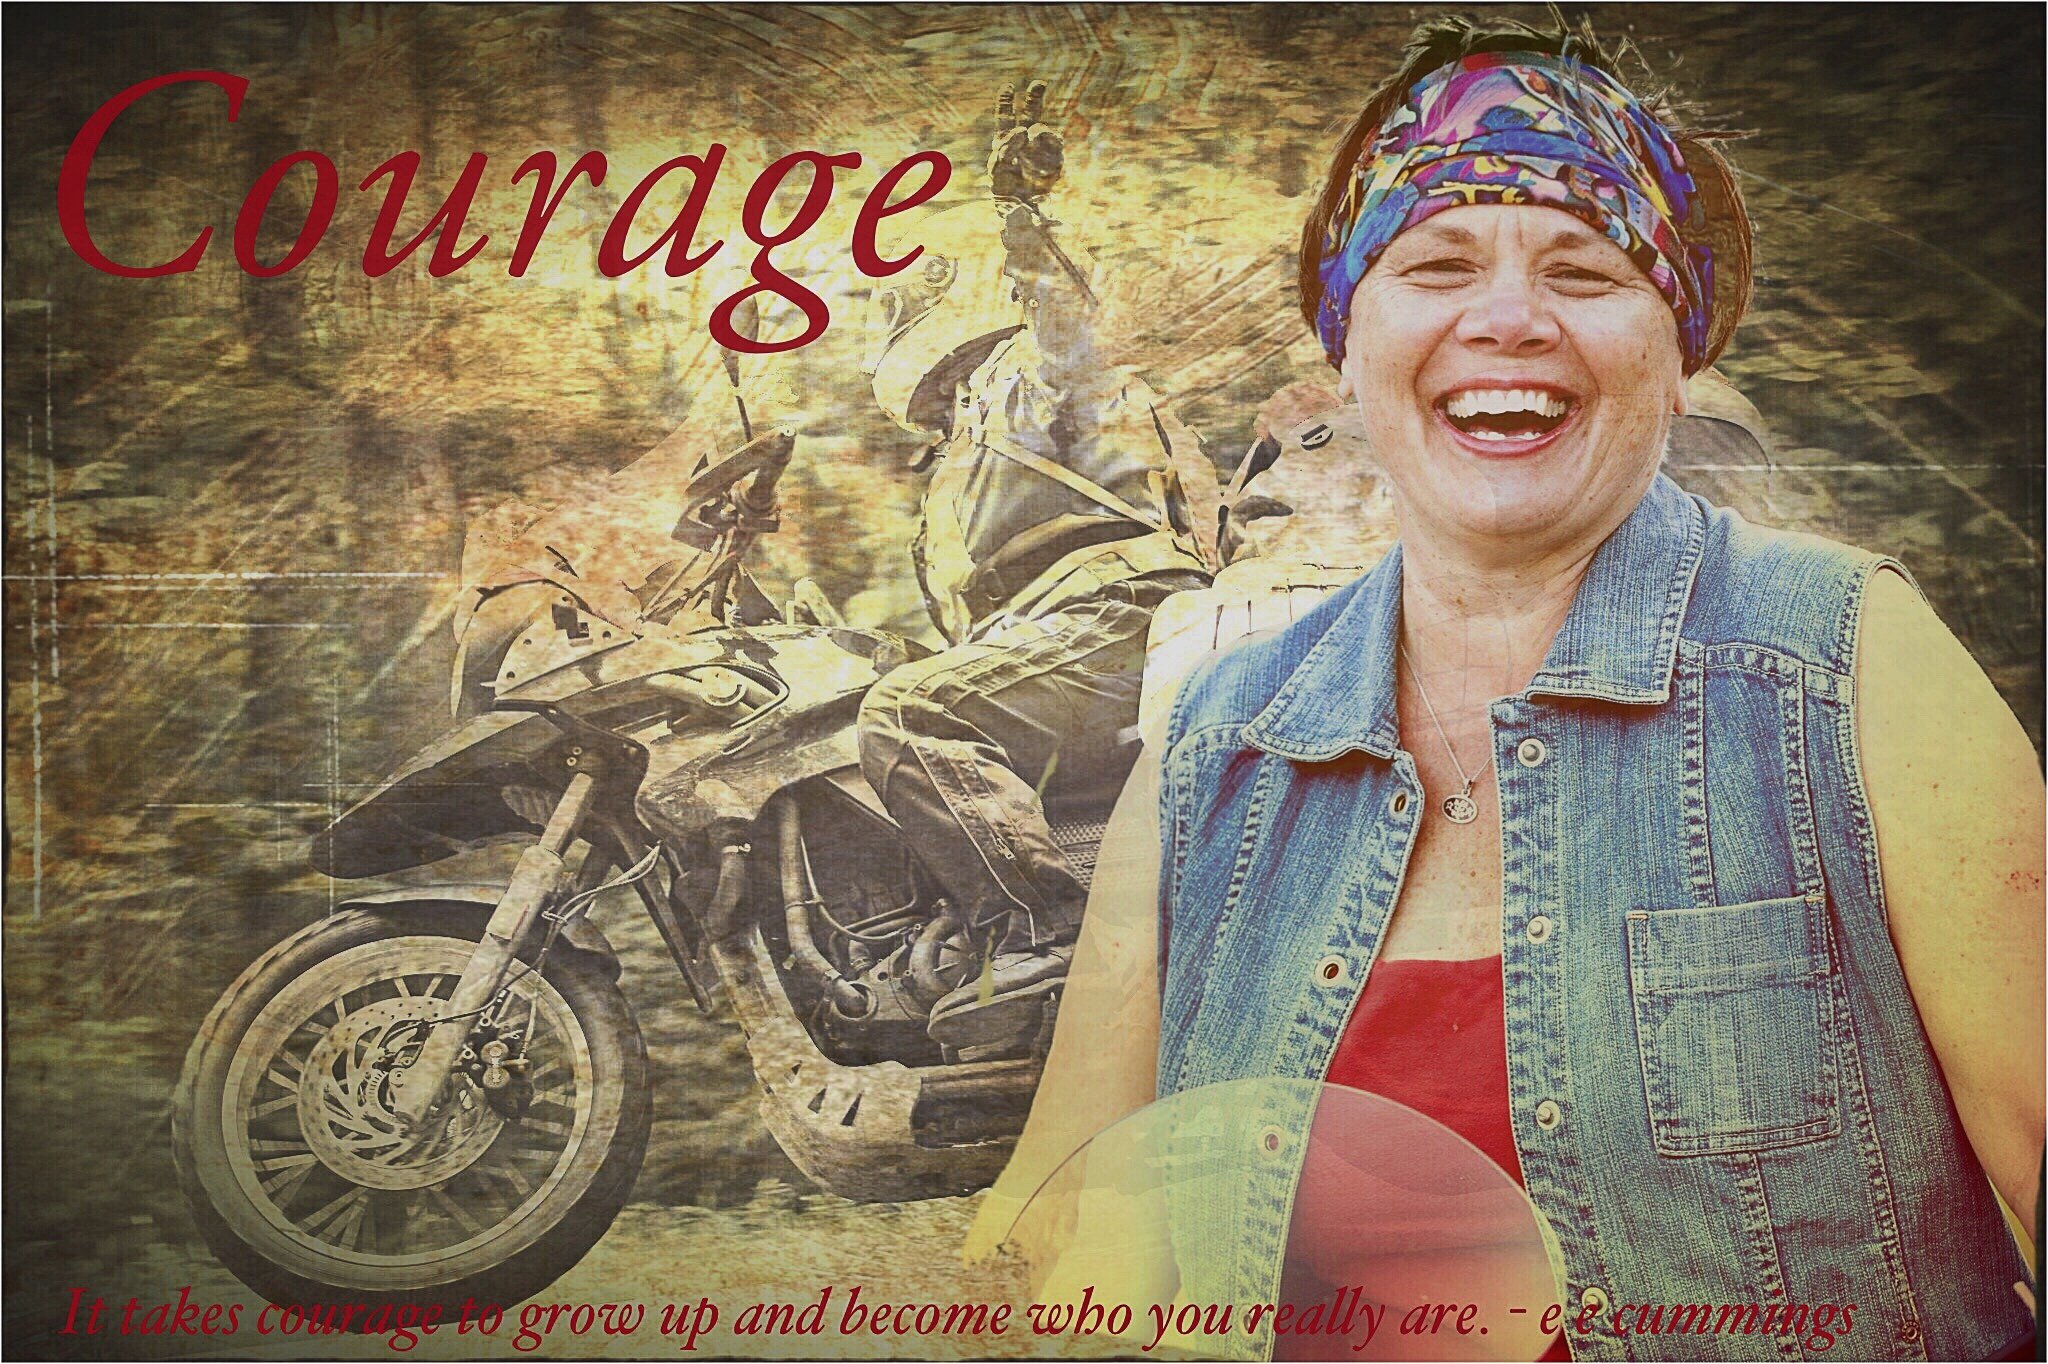 The "Courage" card that Jeri made for my birthday